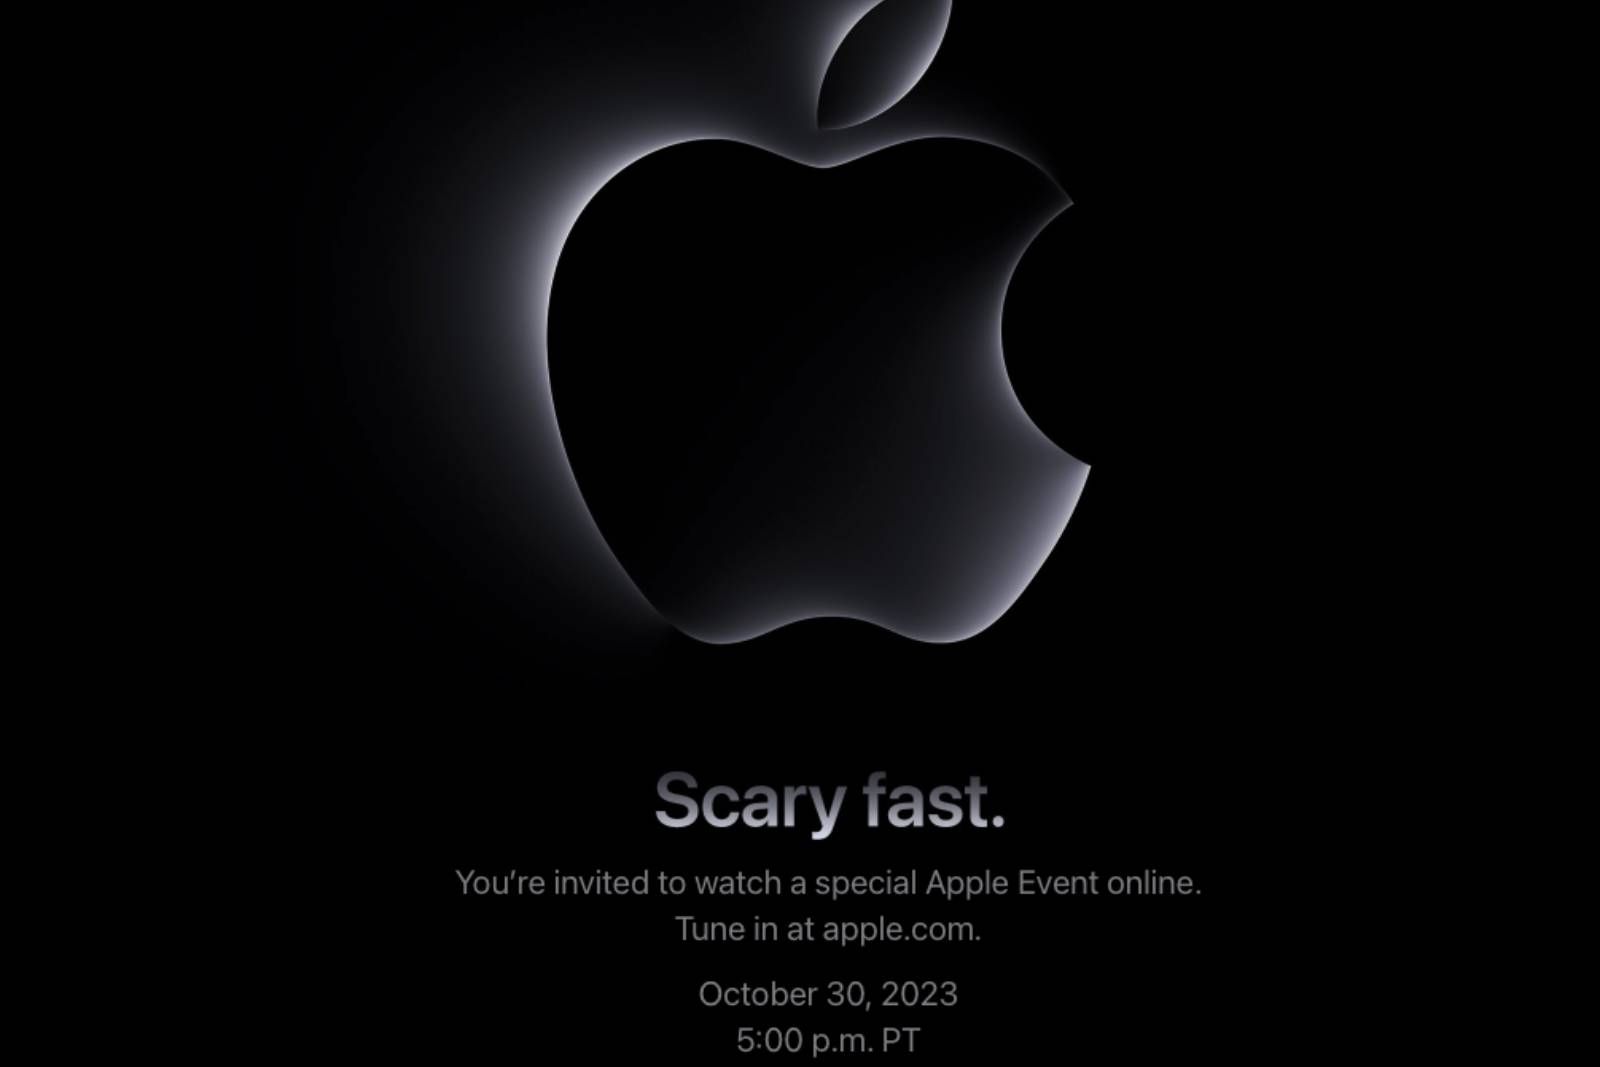 apple-scary-fast-event